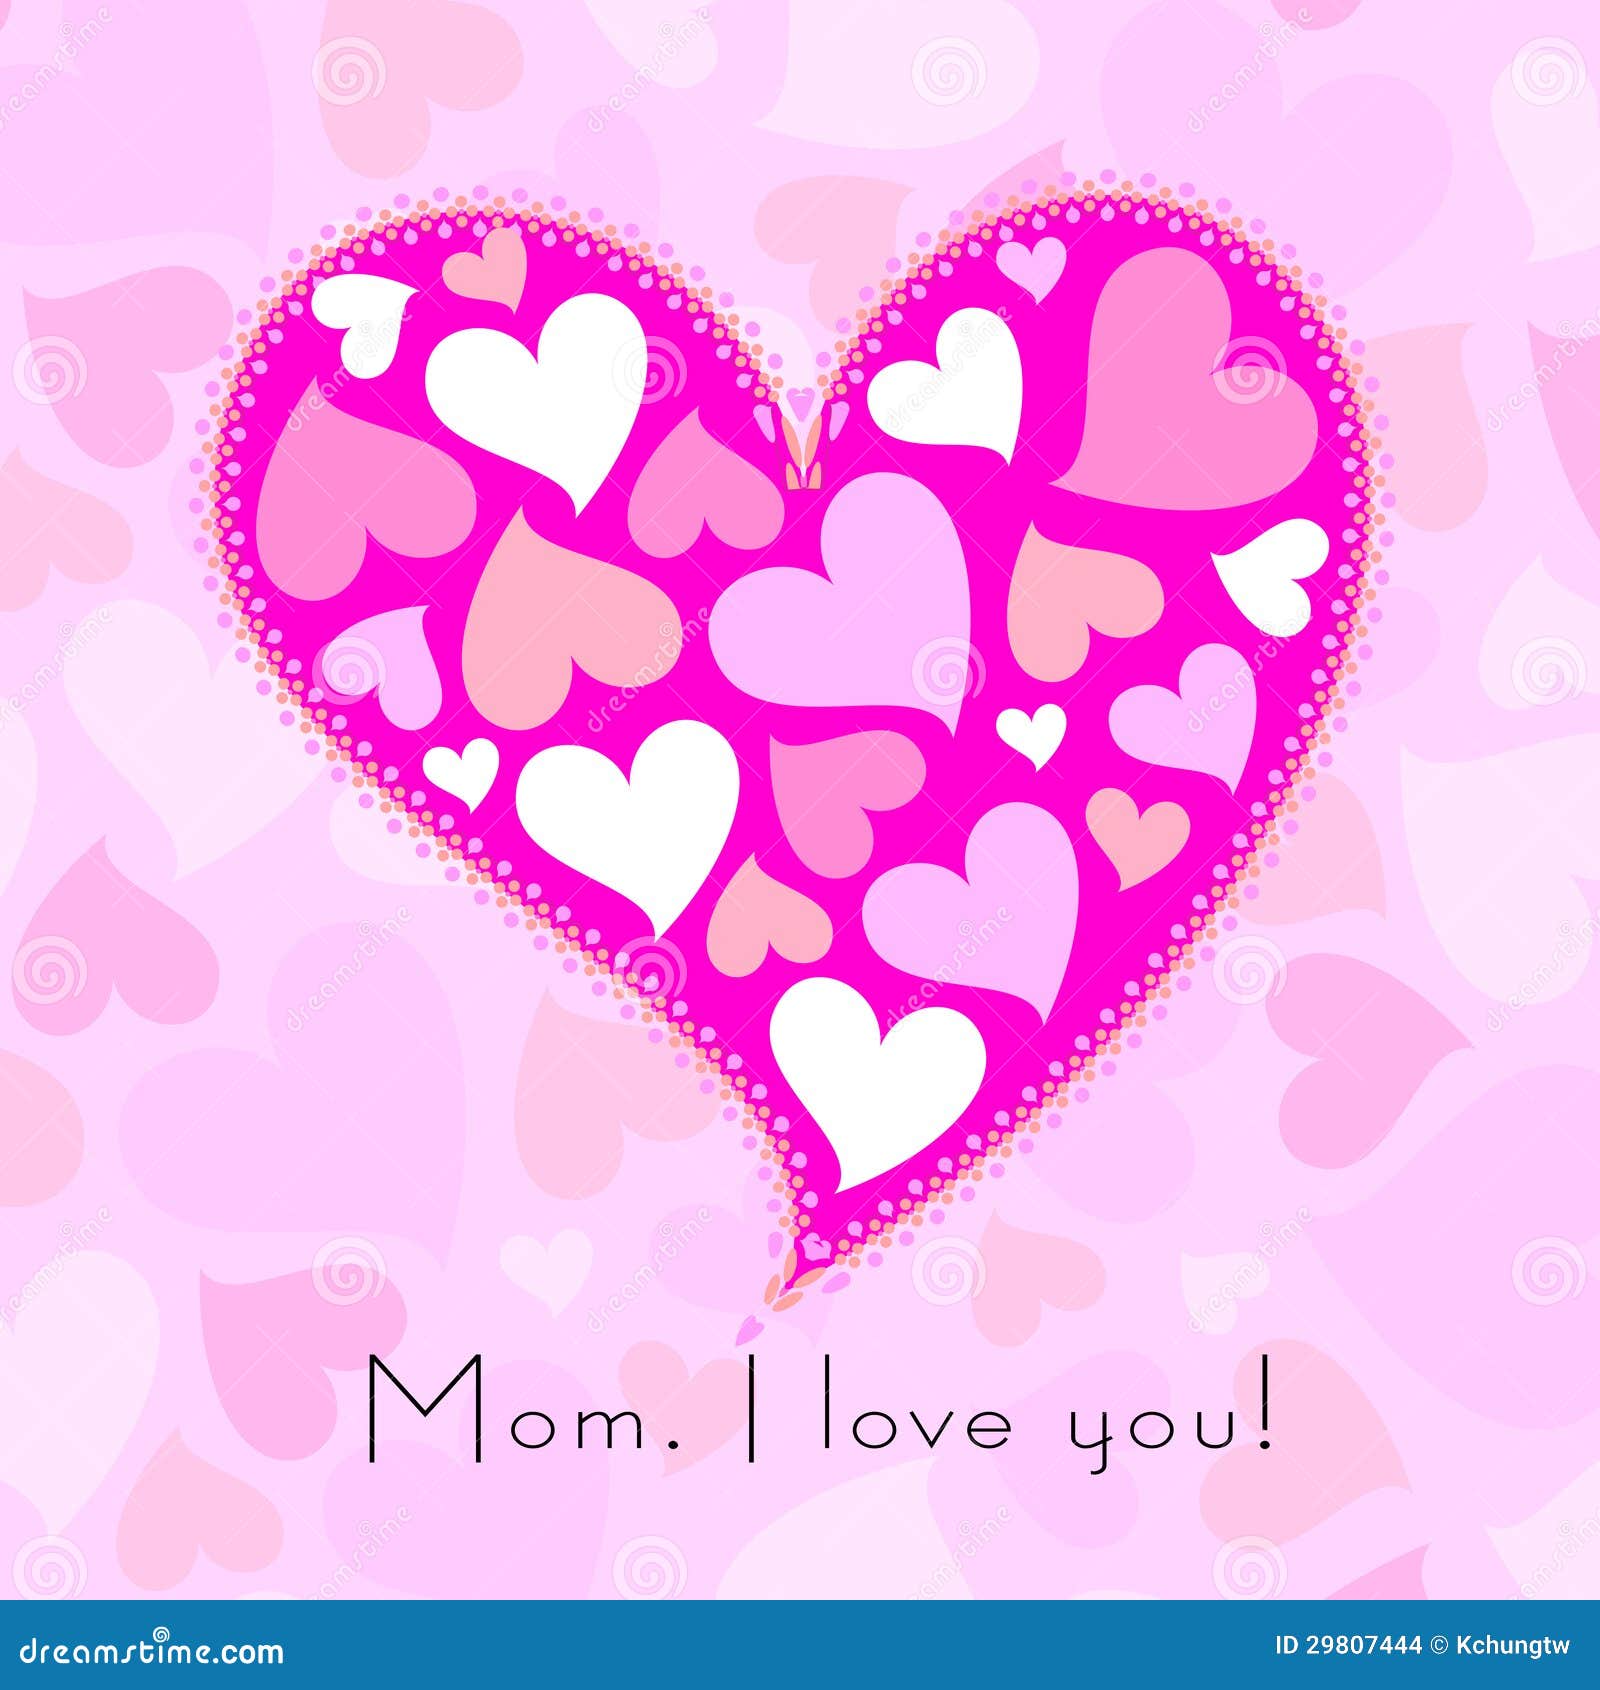 Mother's Day HD Wallpapers Download